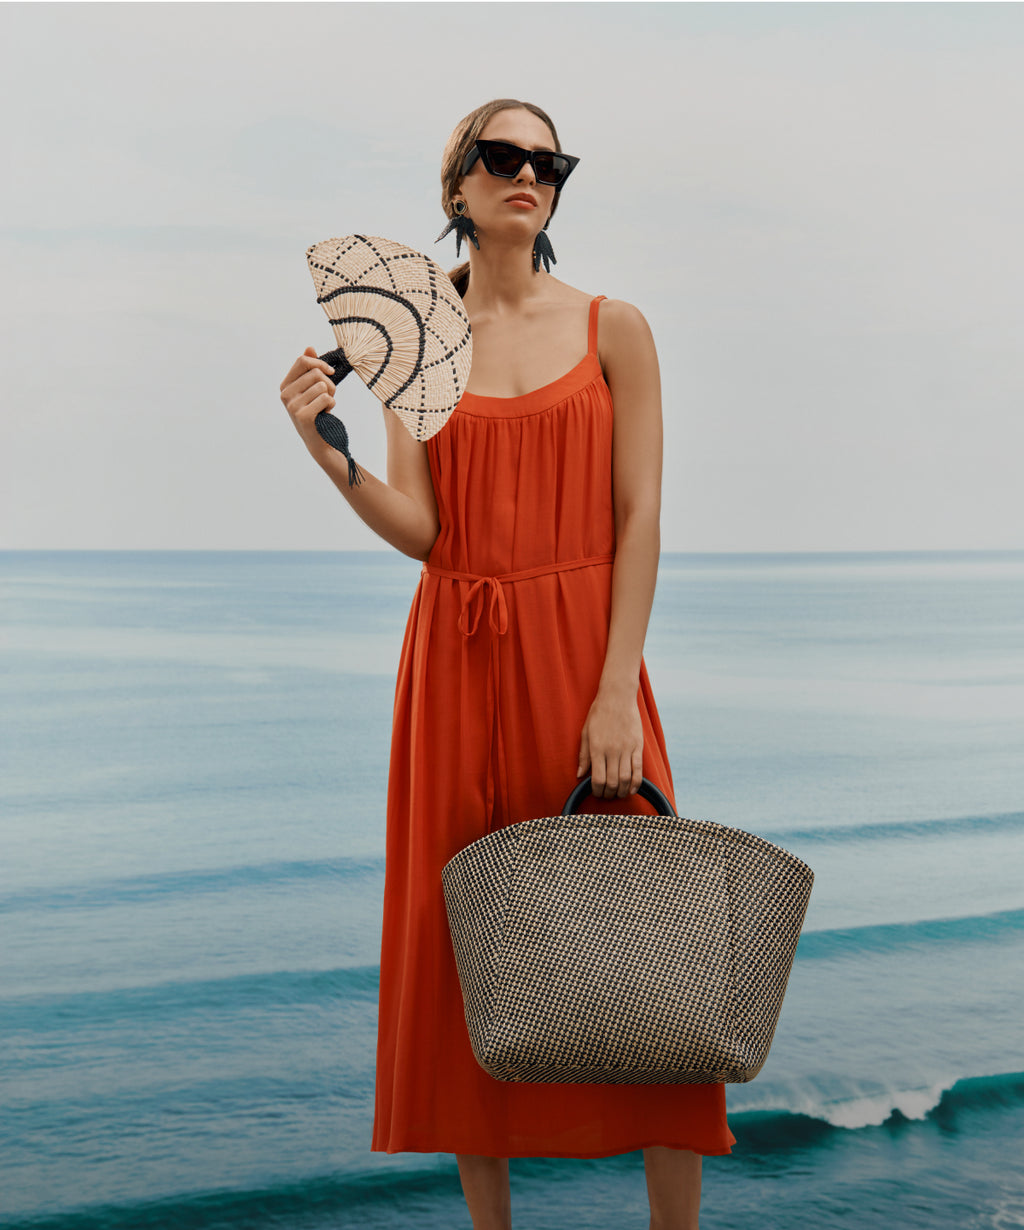 Linked Image. Model wearing orange dress, holding a straw fan with colors beige and black and large straw tote with beige and black.